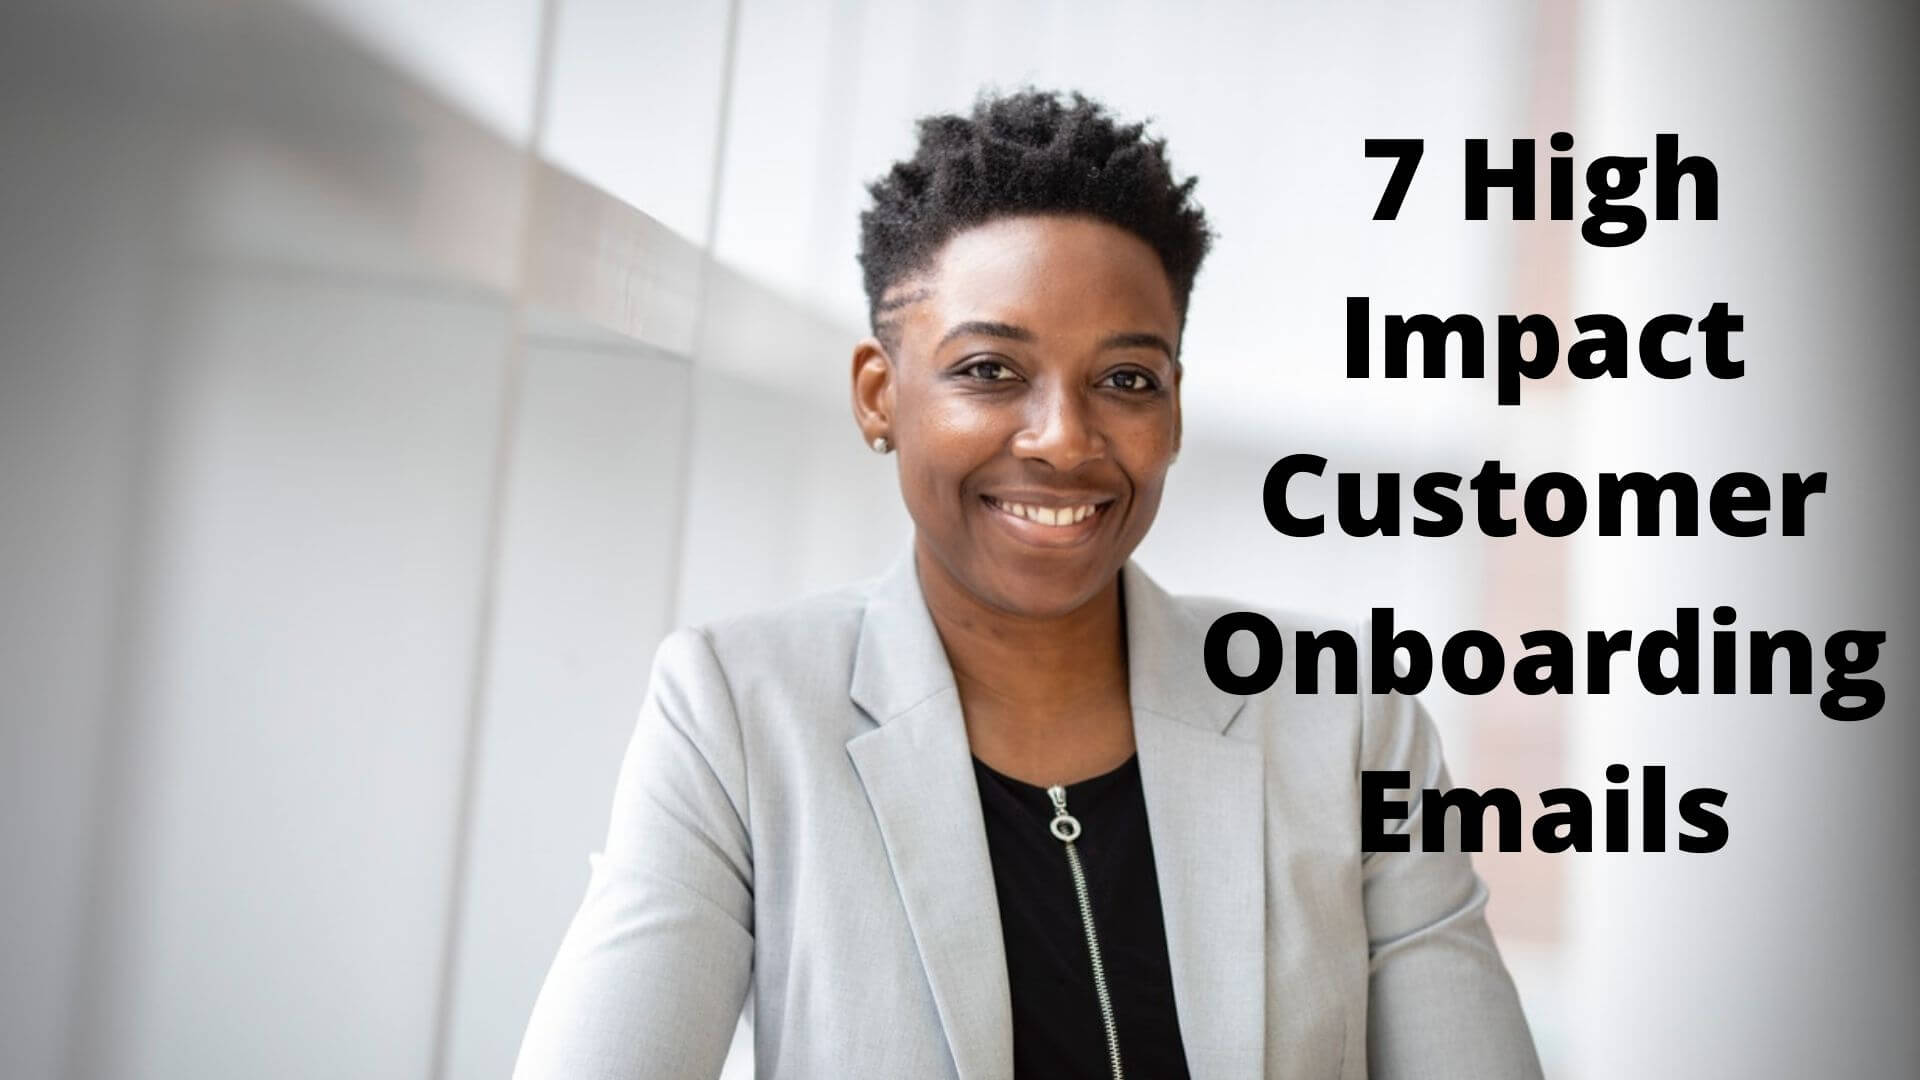 7 high impact customer onboarding emails